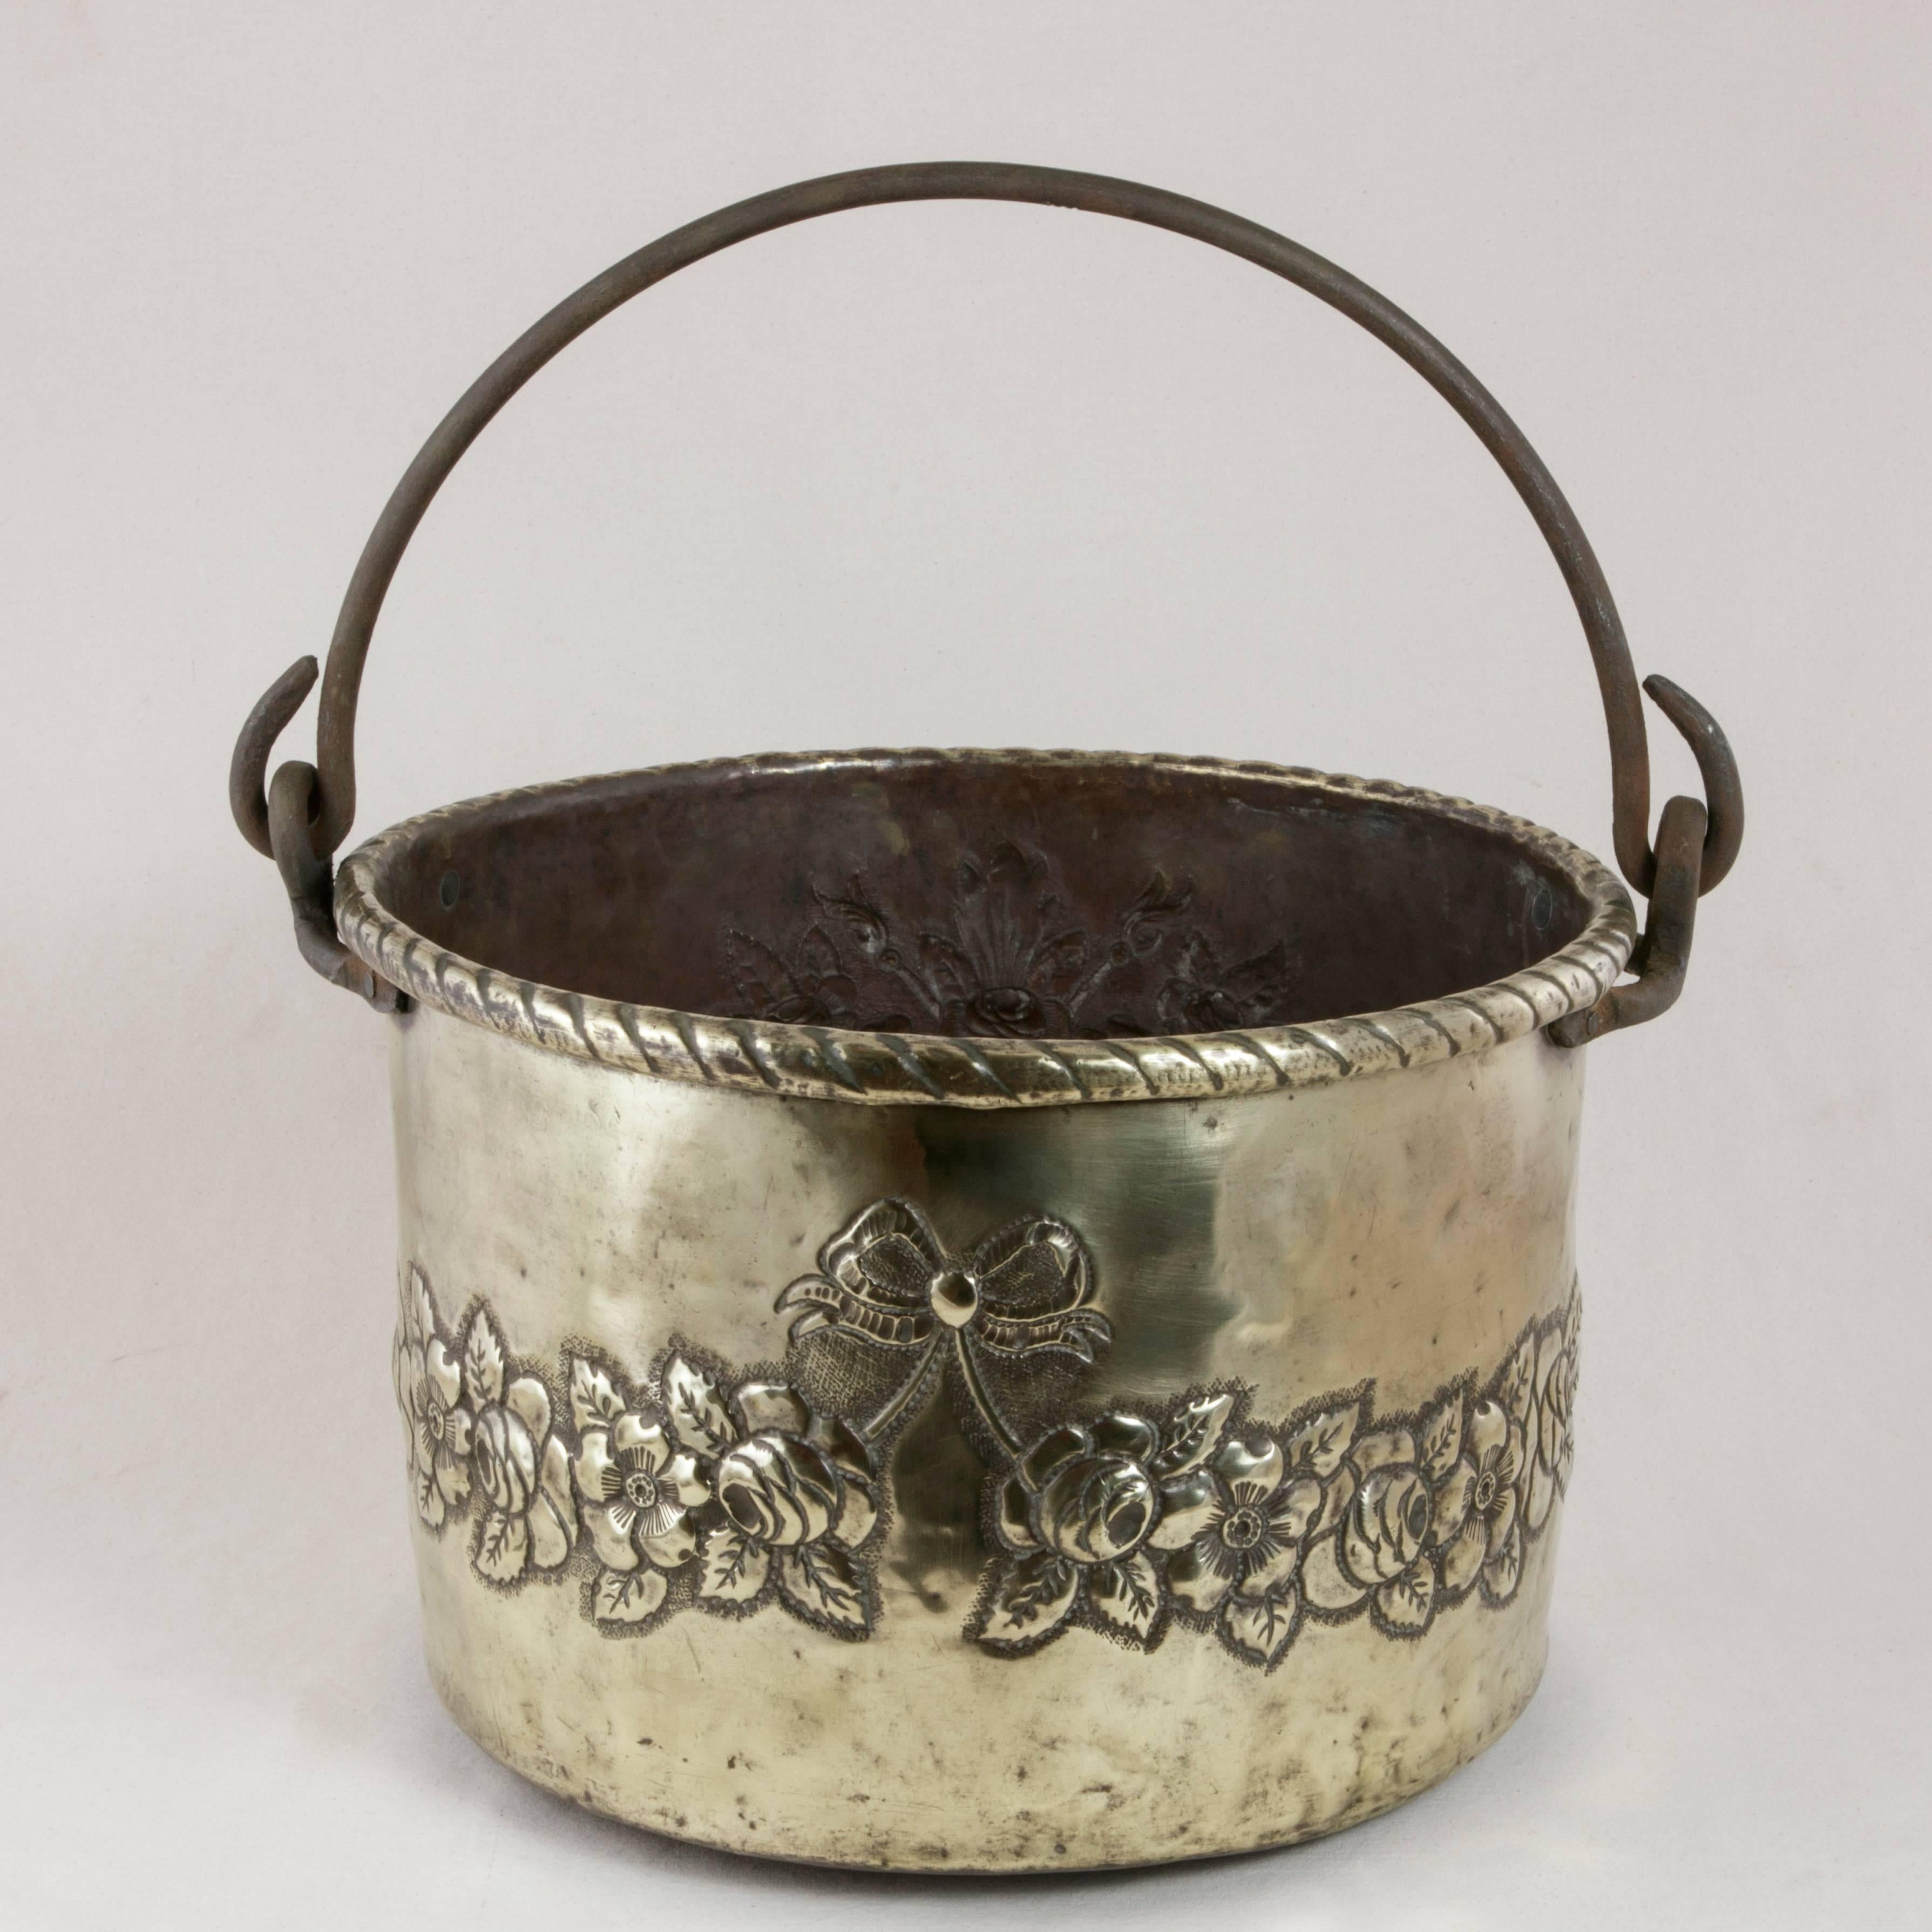 This late 18th century French brass repousse cauldron features a basket and floral bouquet on one side and a garland of flowers with a central ribbon and bow on the other. A twisted ribbon motif surrounds its upper rolled edge. This large pot is